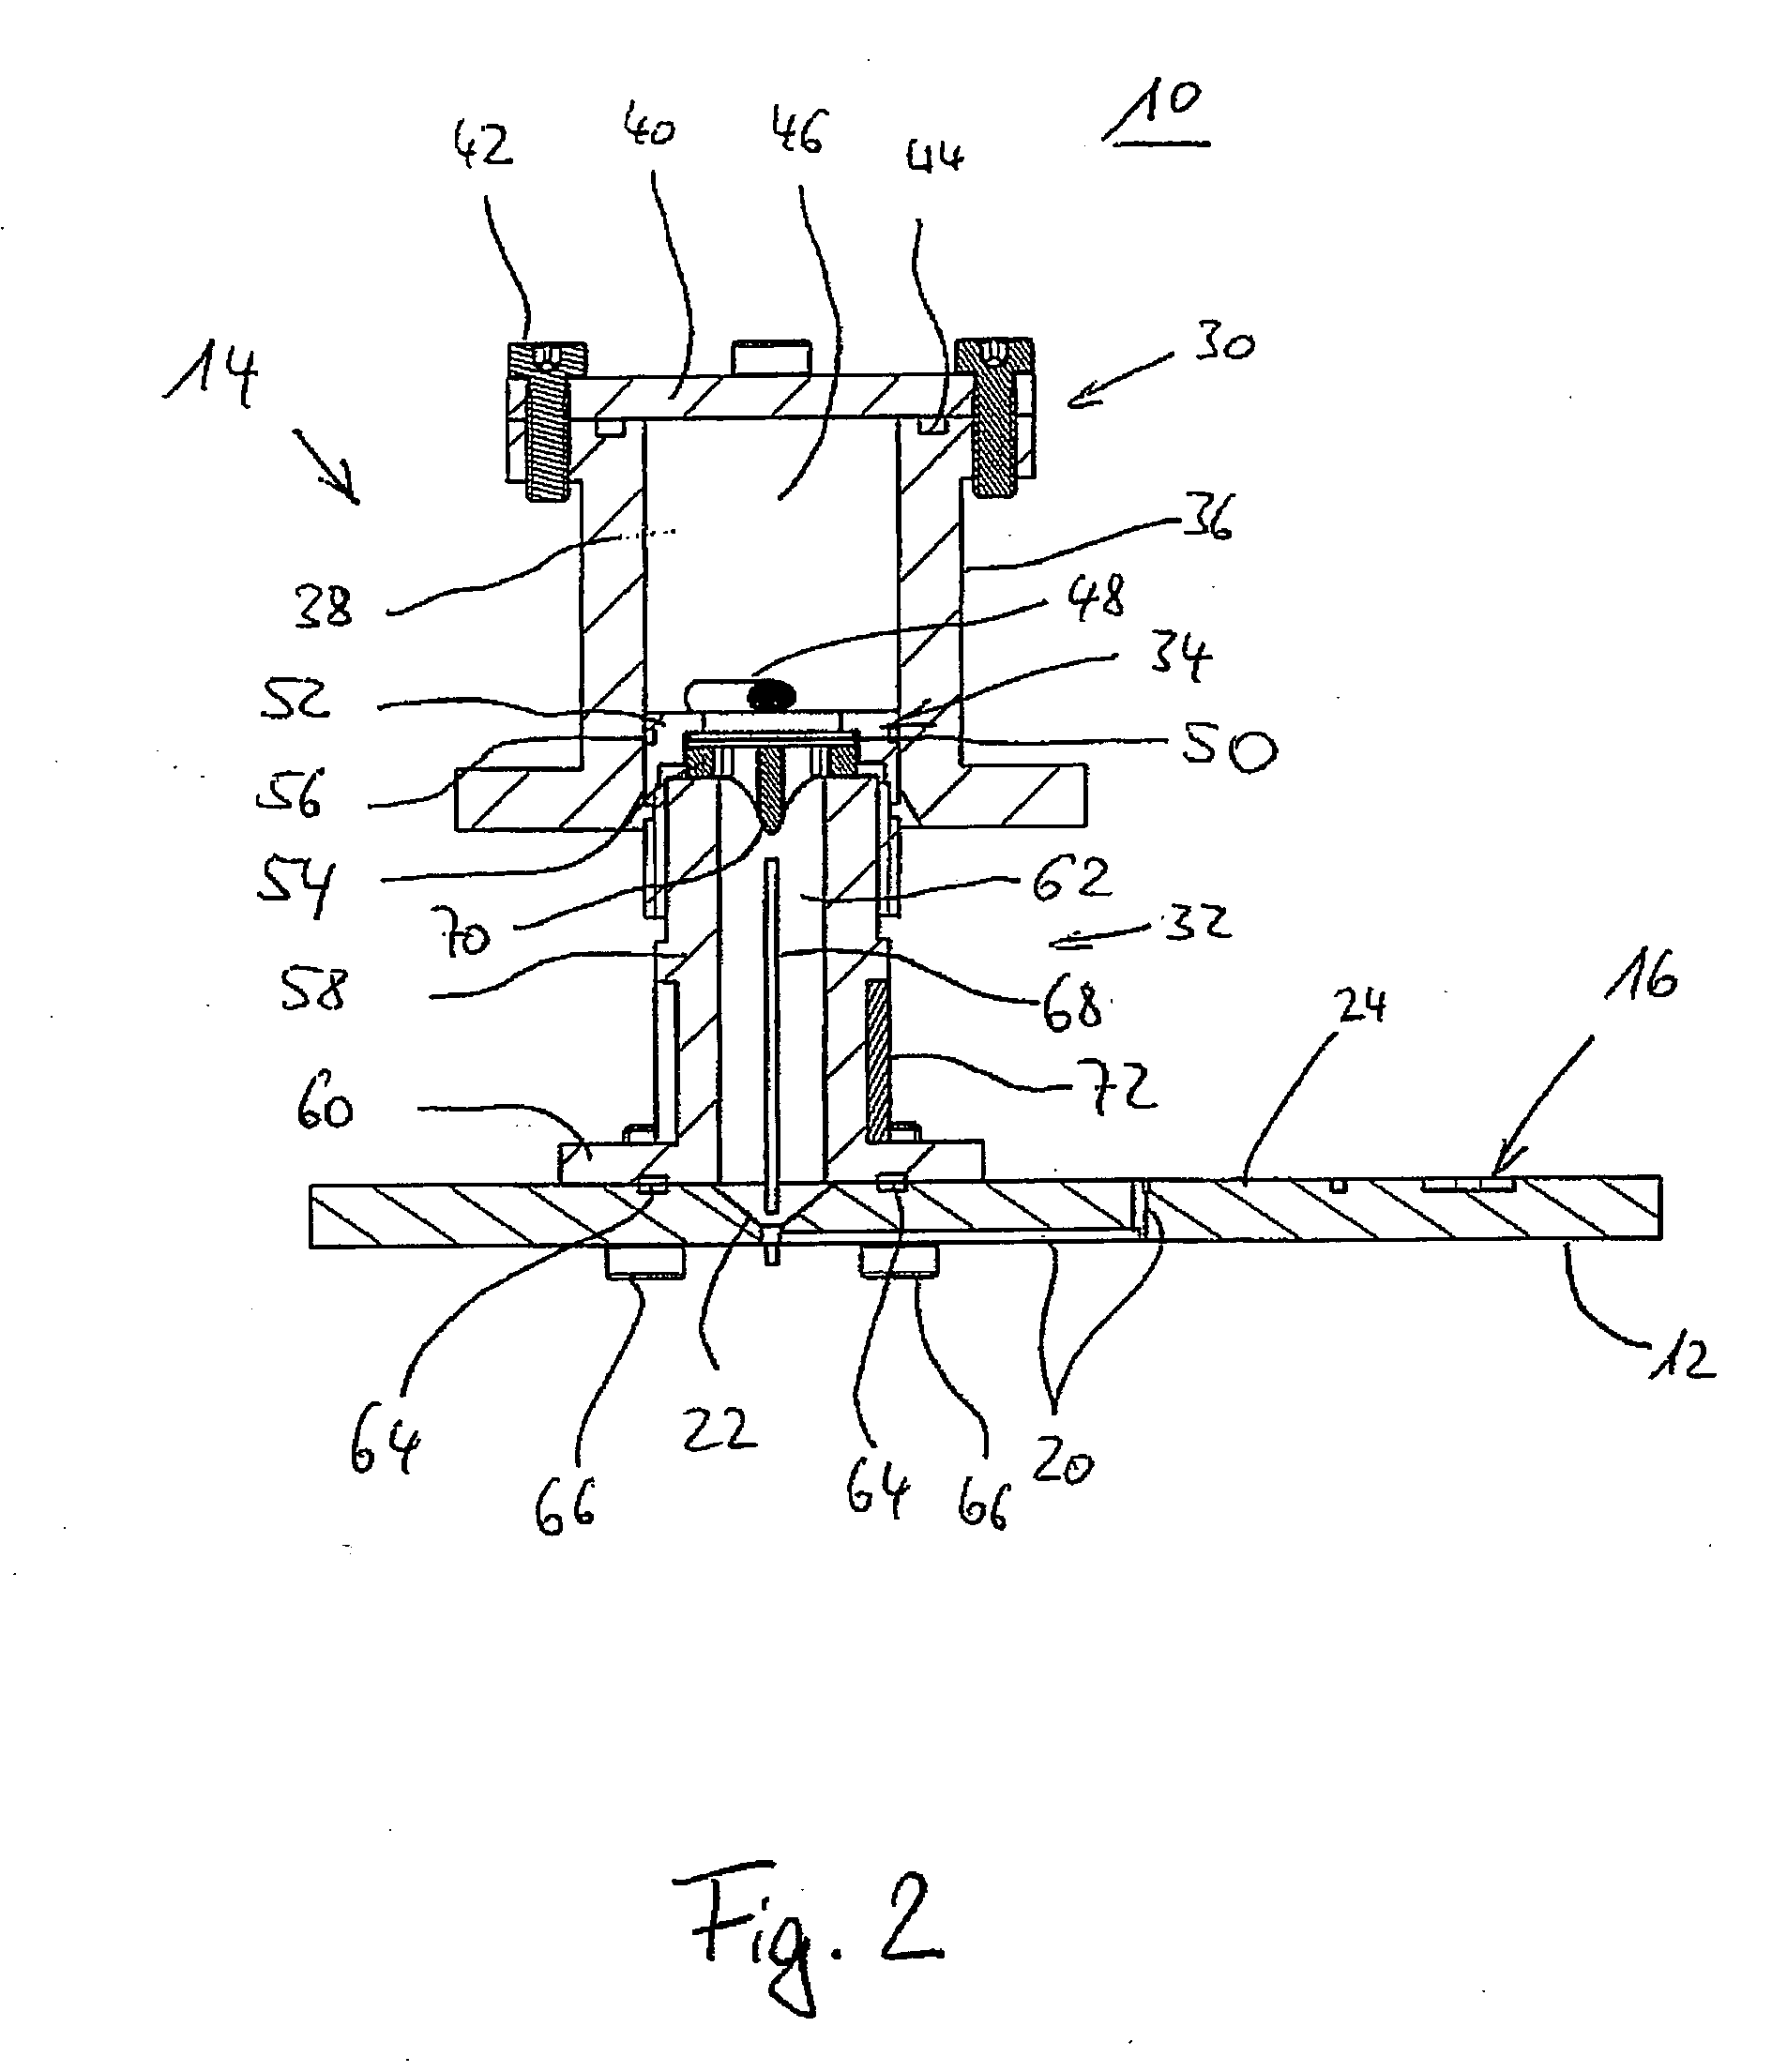 Microfluidic extraction and reaction device